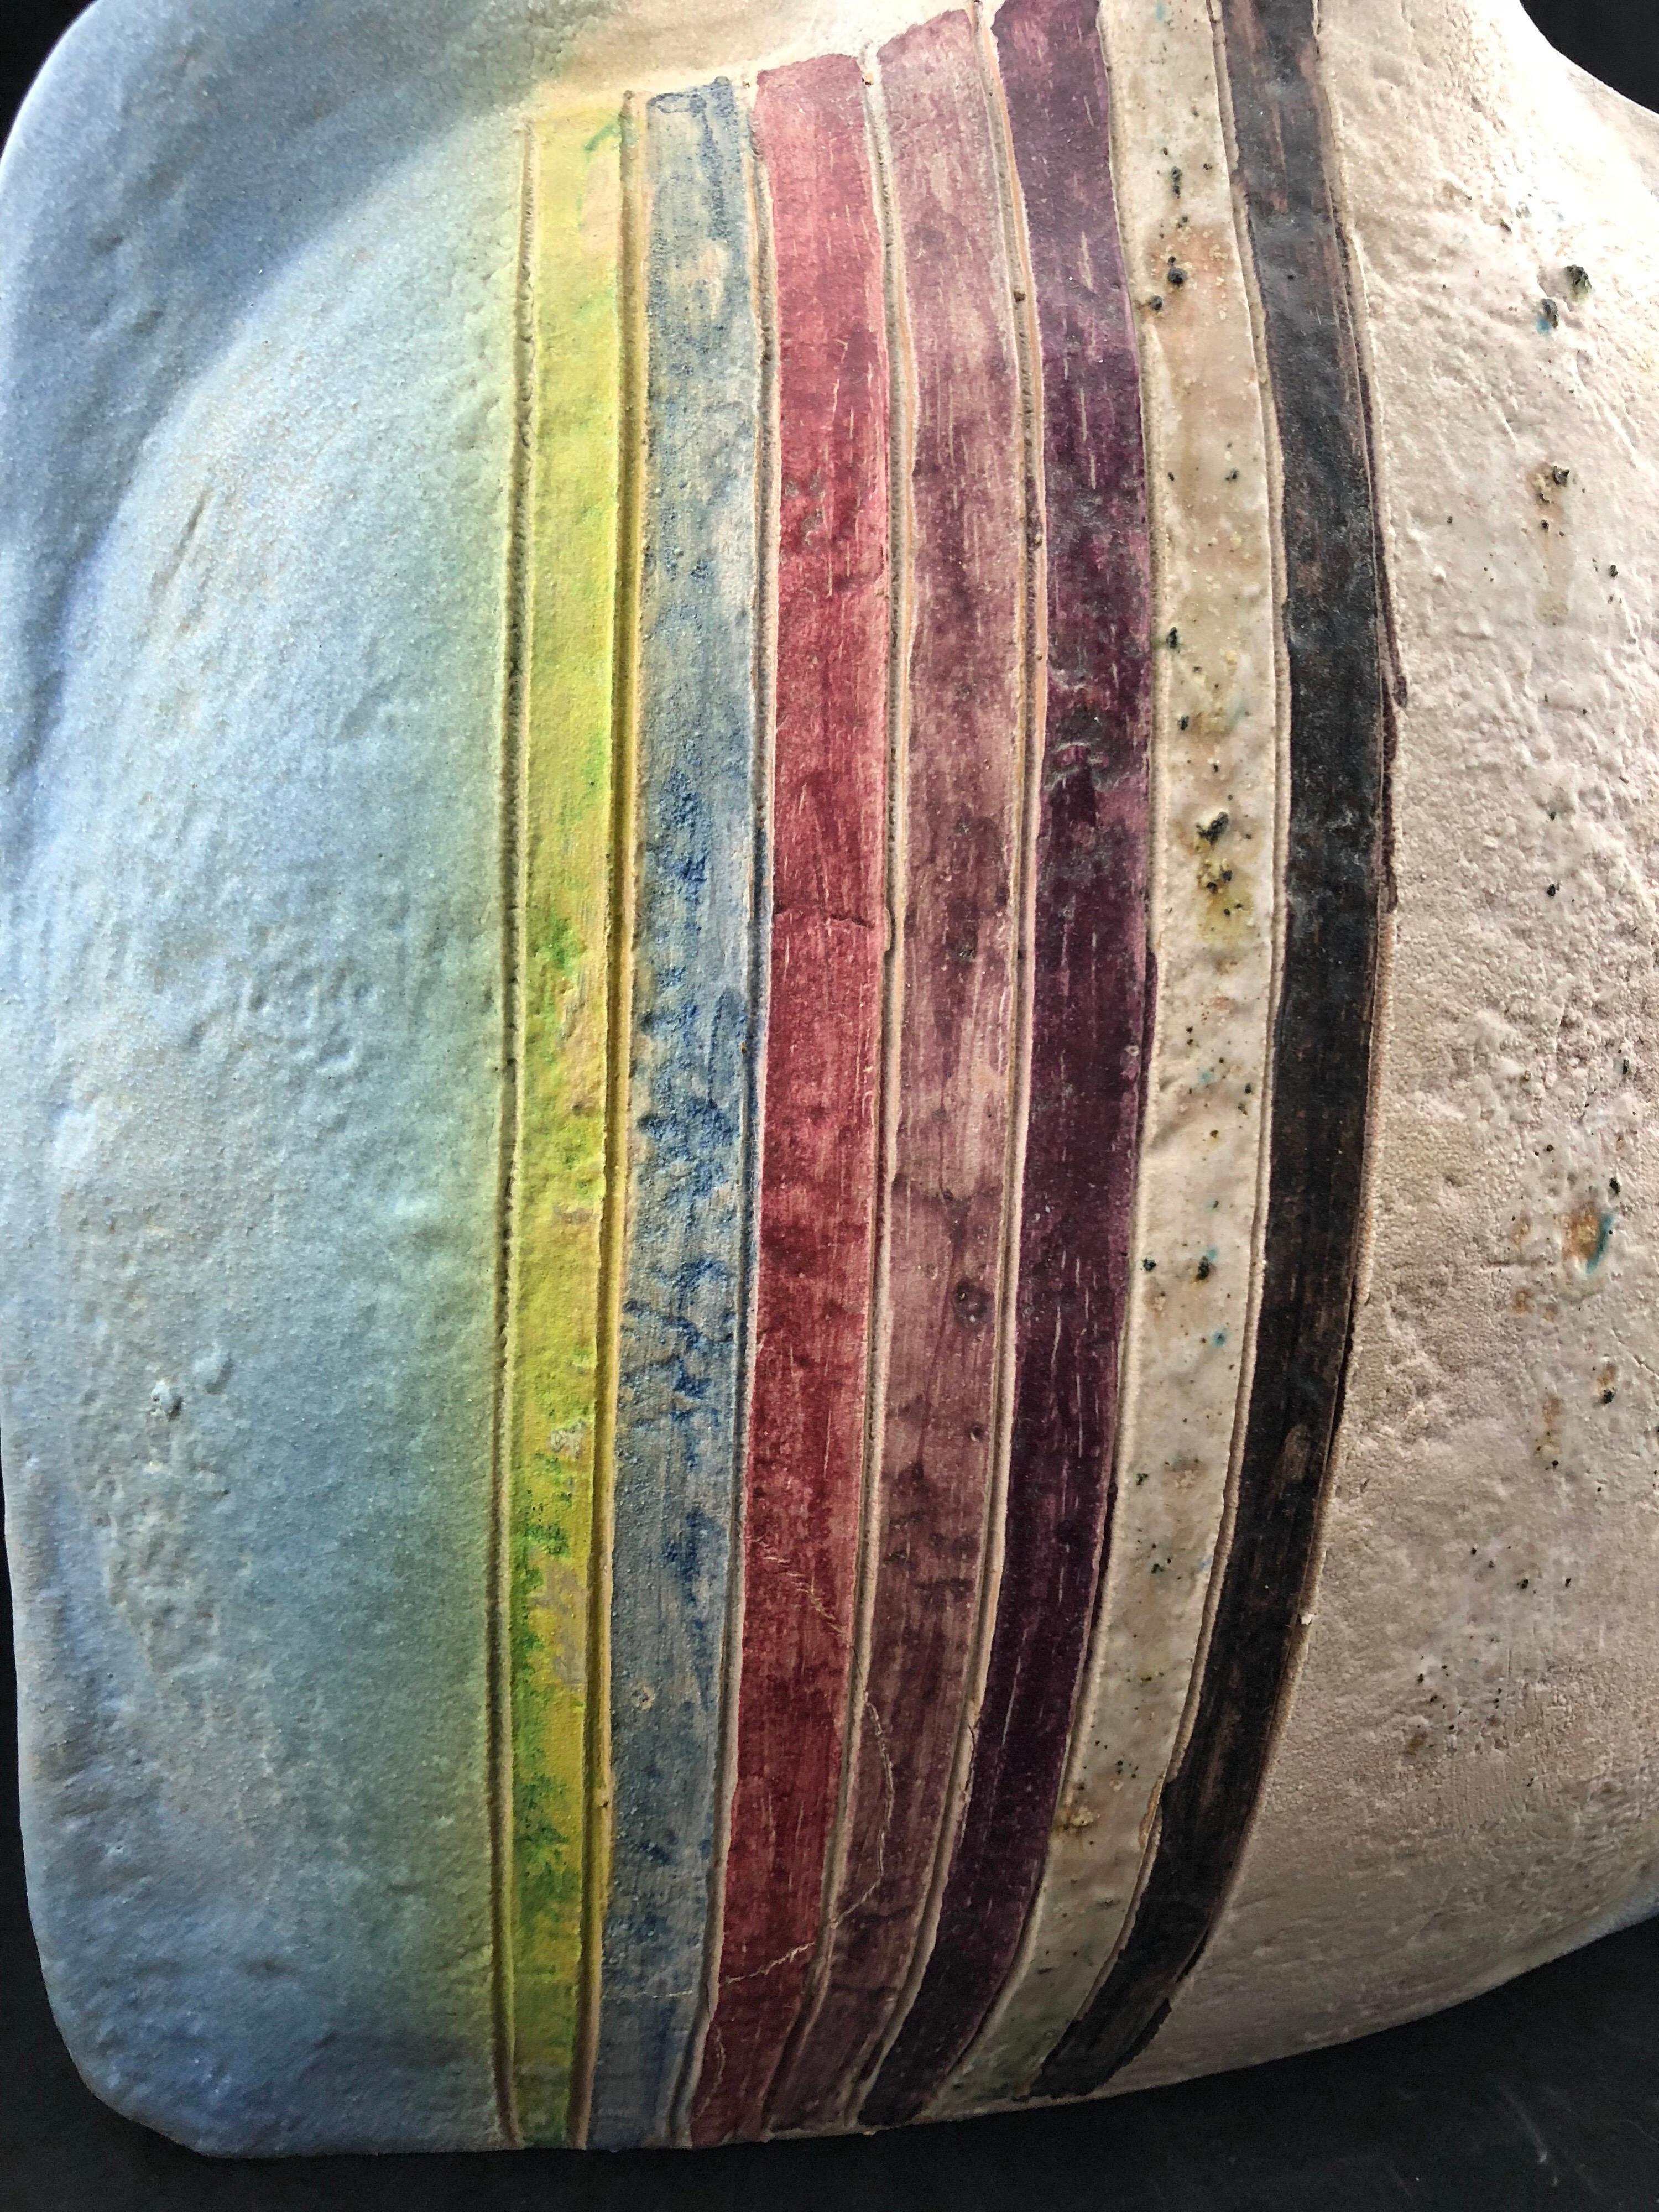 Extra large Italian vase designed by Ivo de Santis for Gli Utruschi. Vase features colorful stripes and a spiral accent. Signed and dated. No know issues that would detract from value or aesthetics. Ready for use.